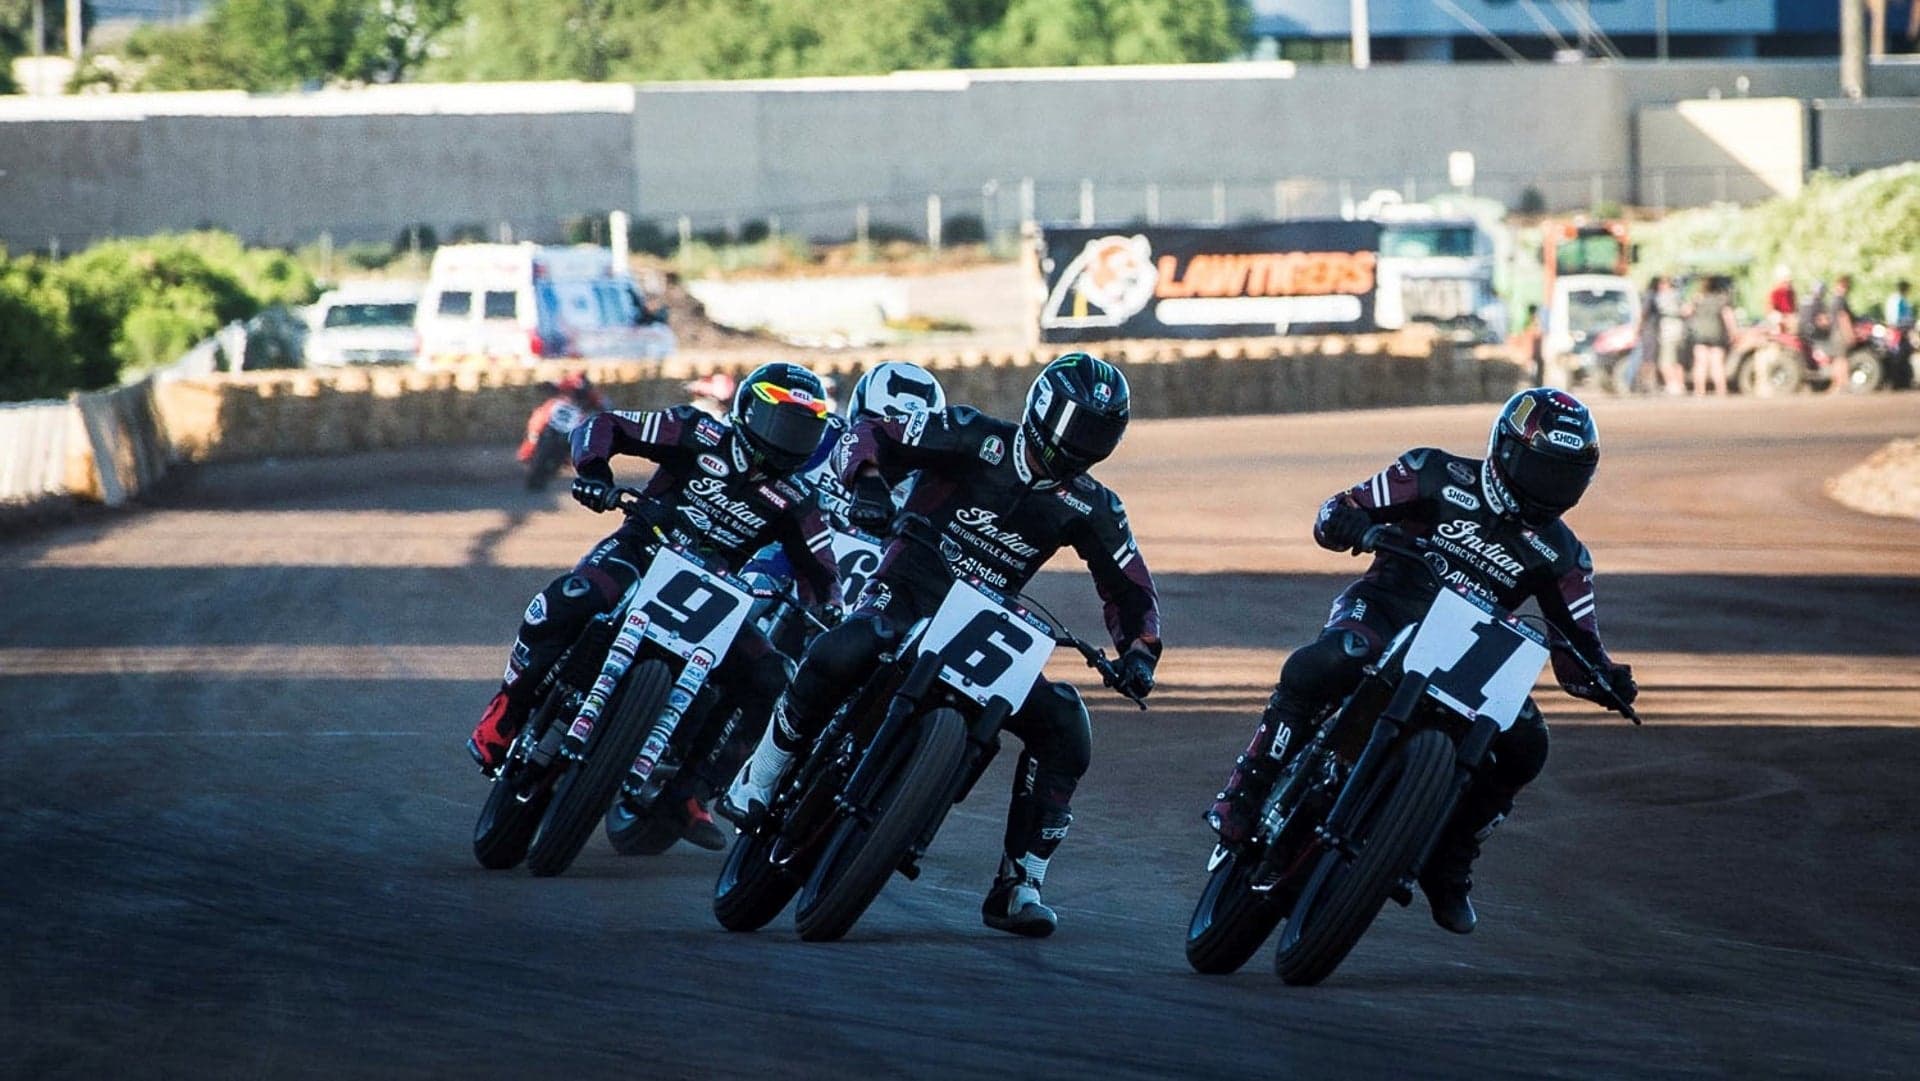 Dainese Continues Partnership With American Flat Track